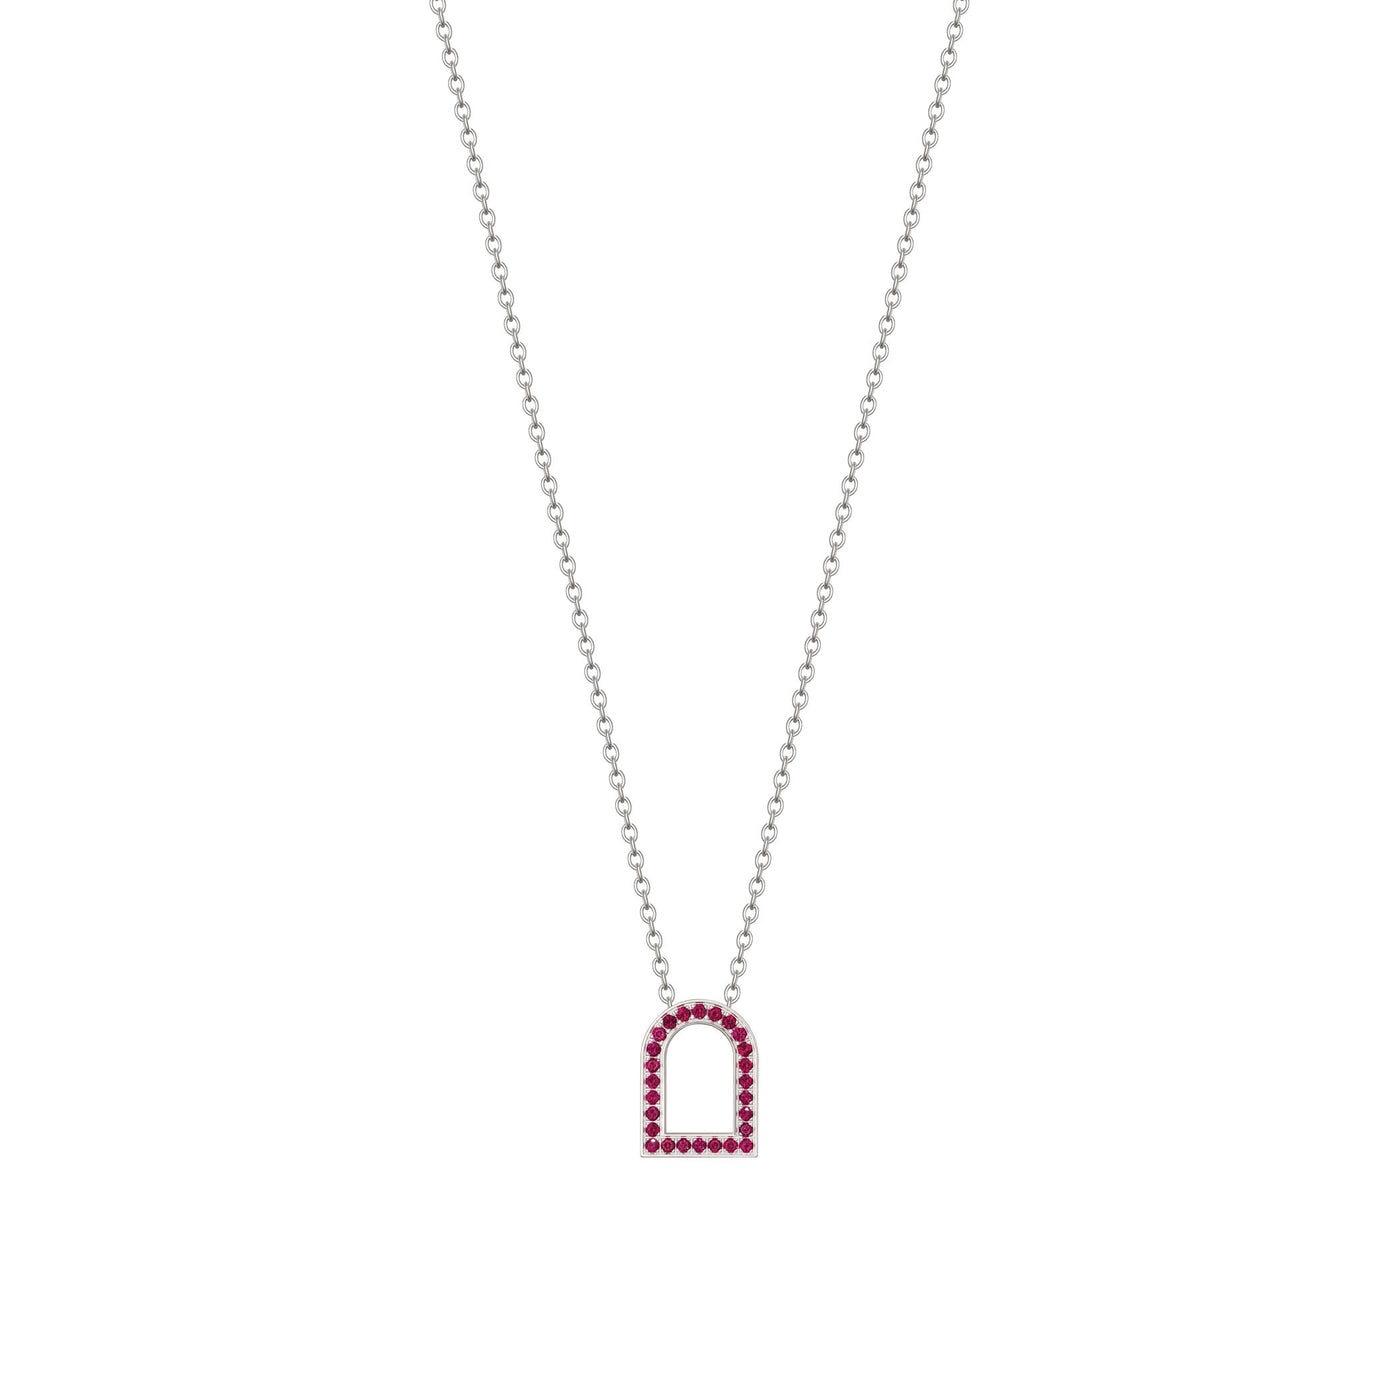 L'Arc Voyage Charm MM, 18k White Gold with Galerie Rubies on Chain Necklace - DAVIDOR